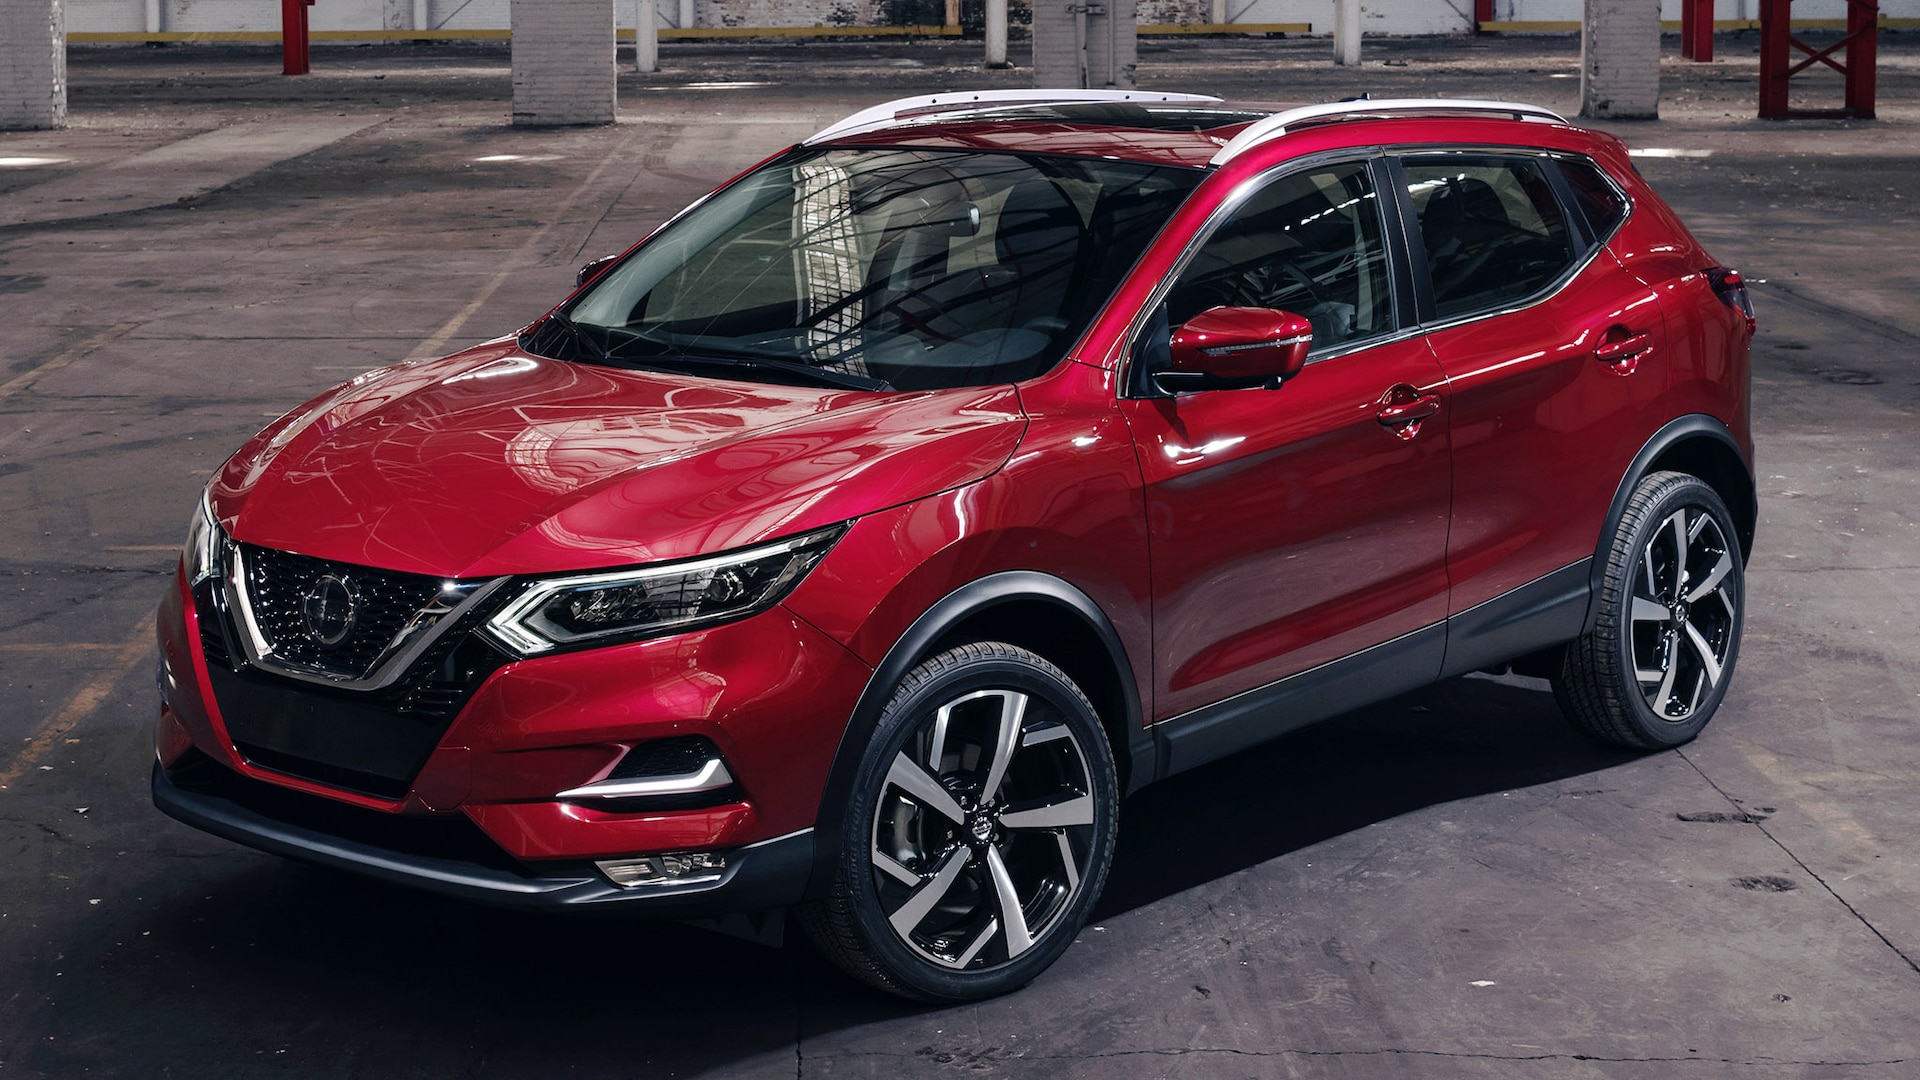 2022 Nissan Rogue Sport Prices, Reviews, and Photos - MotorTrend